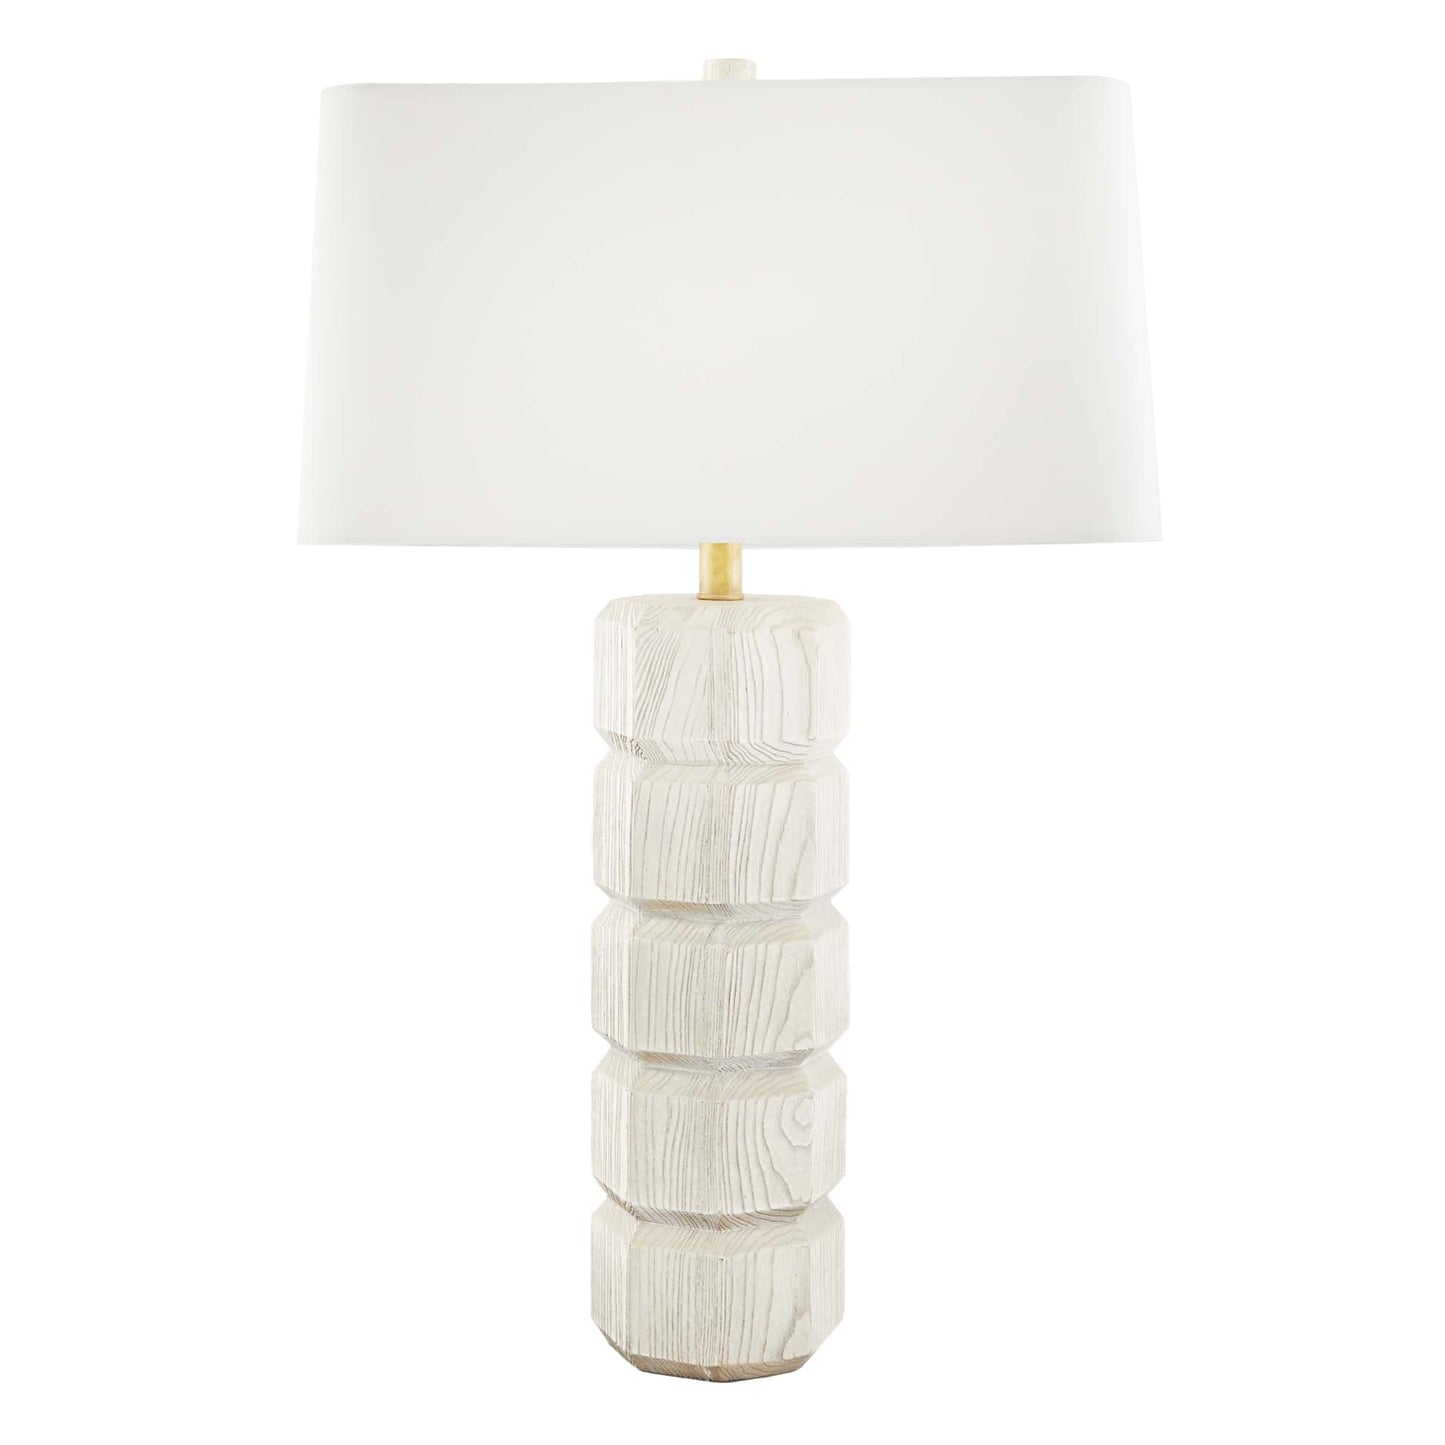 Shepard Lamp - Smoke Oak Table Lamp with Stacked Geometric Shapes